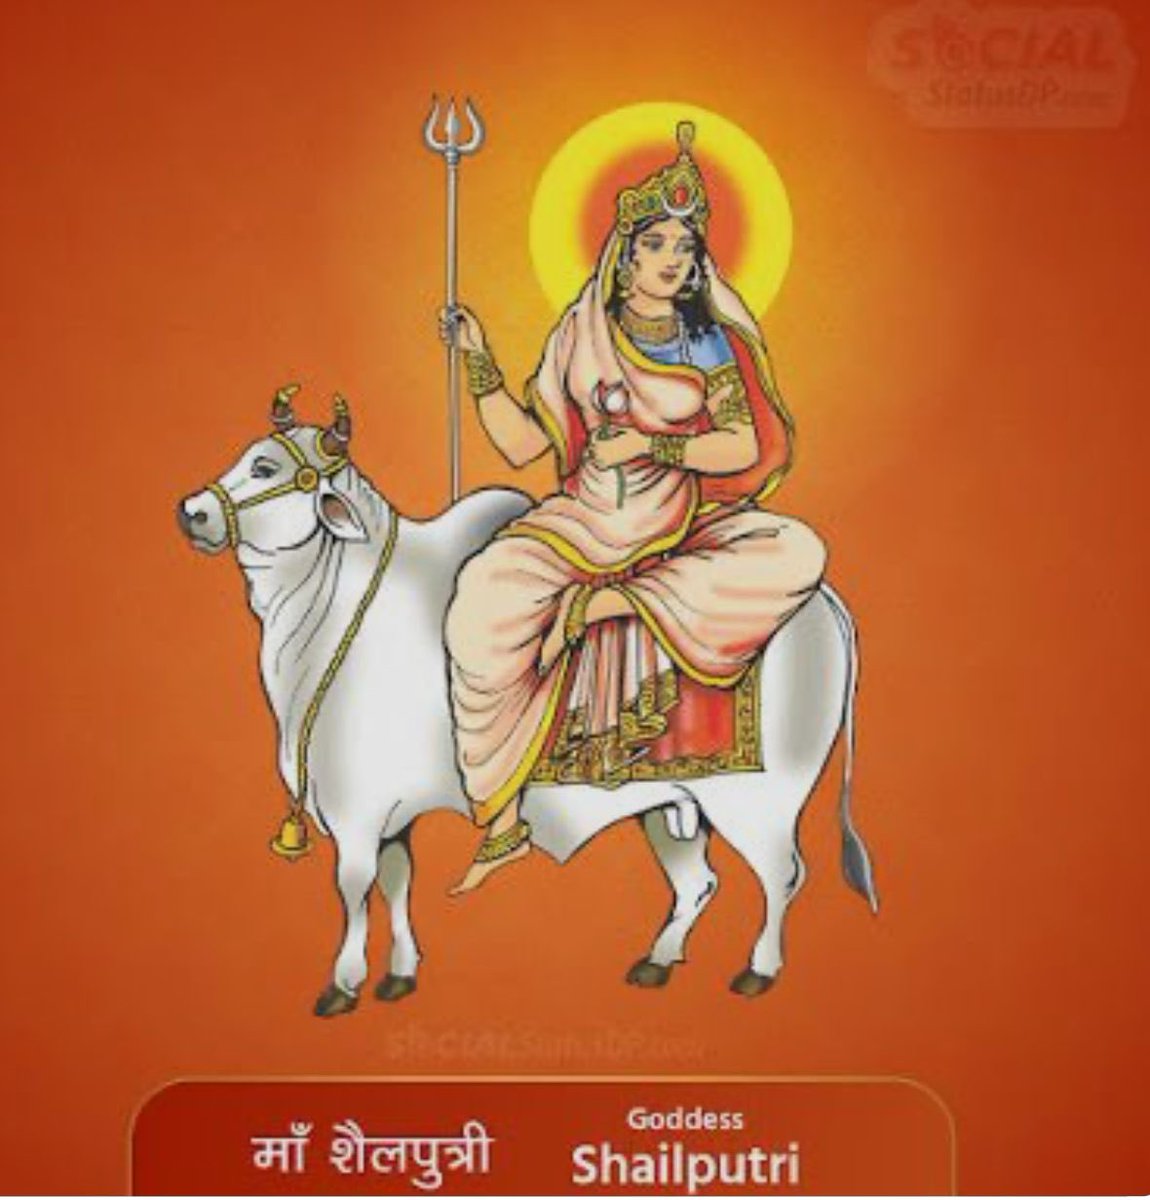 Good morning ….Greetings on the most auspicious first day of Navratri …. May Maa Shailputri Bless us all ….Jai Maa